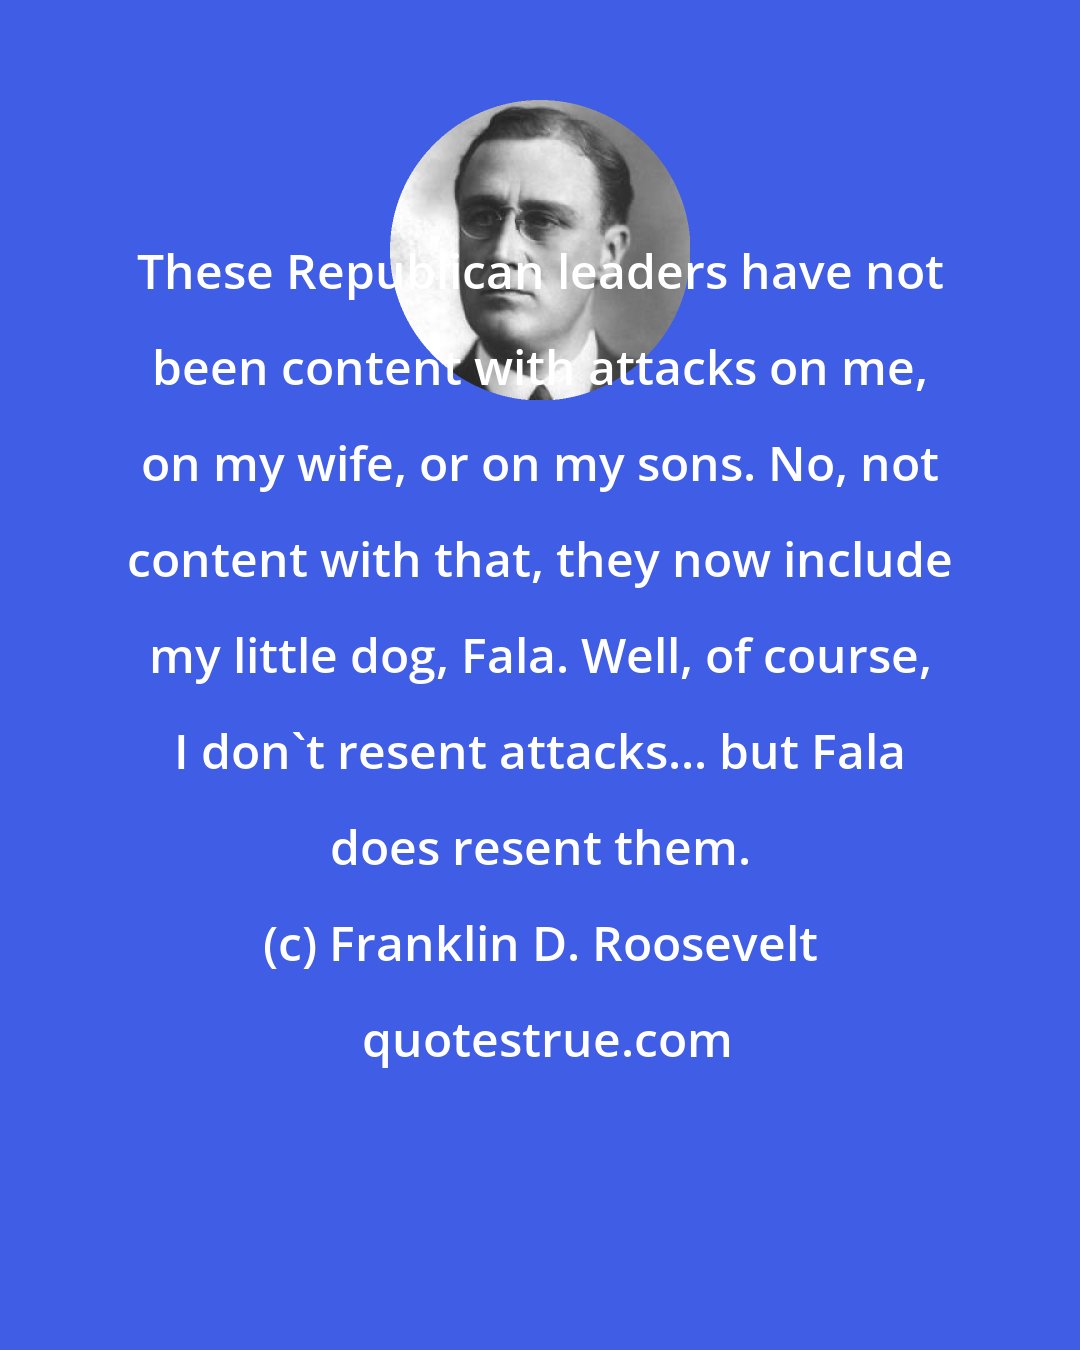 Franklin D. Roosevelt: These Republican leaders have not been content with attacks on me, on my wife, or on my sons. No, not content with that, they now include my little dog, Fala. Well, of course, I don't resent attacks... but Fala does resent them.